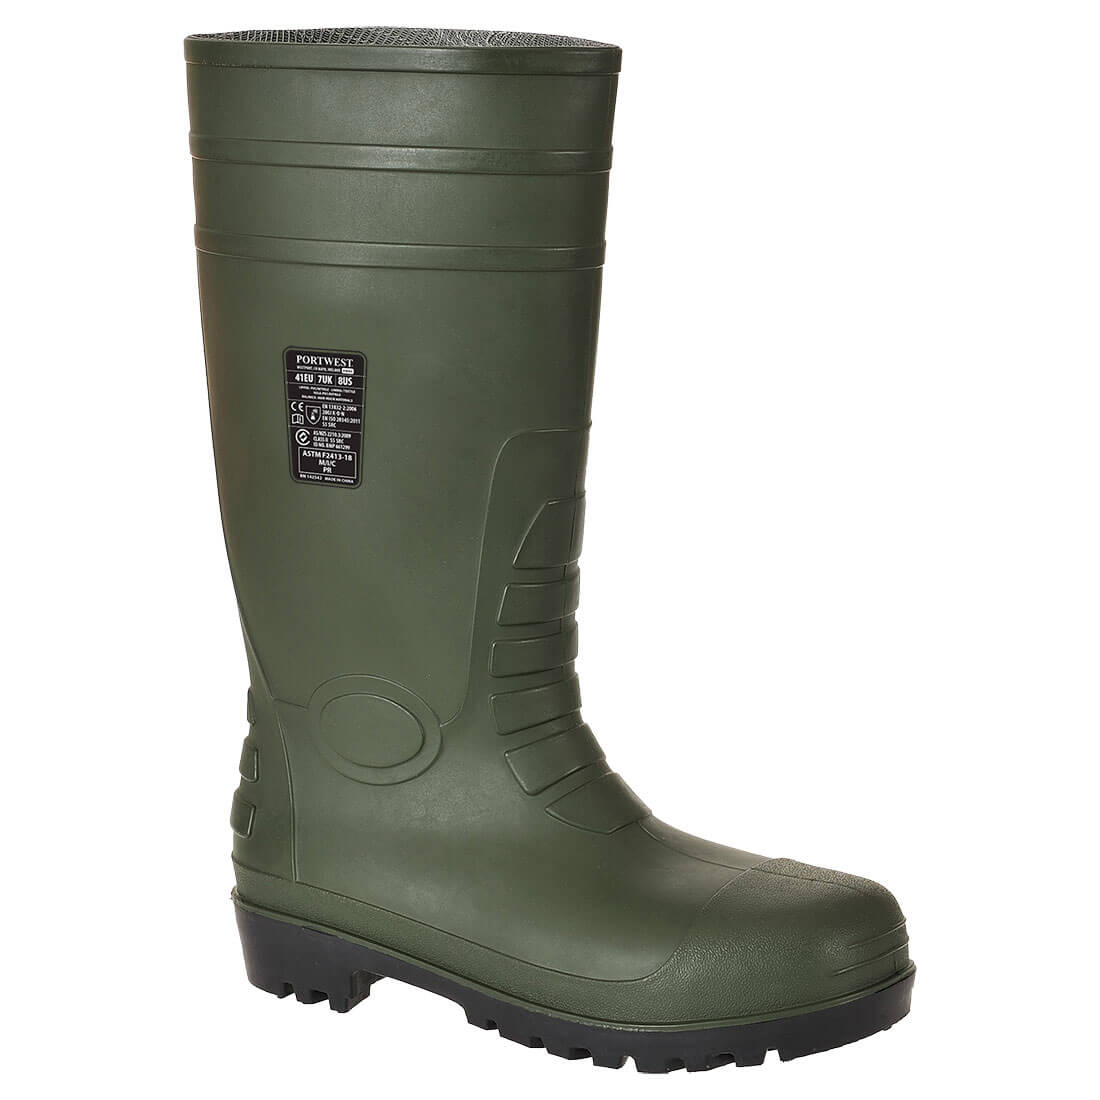 Total Safety Wellington S5 - Green